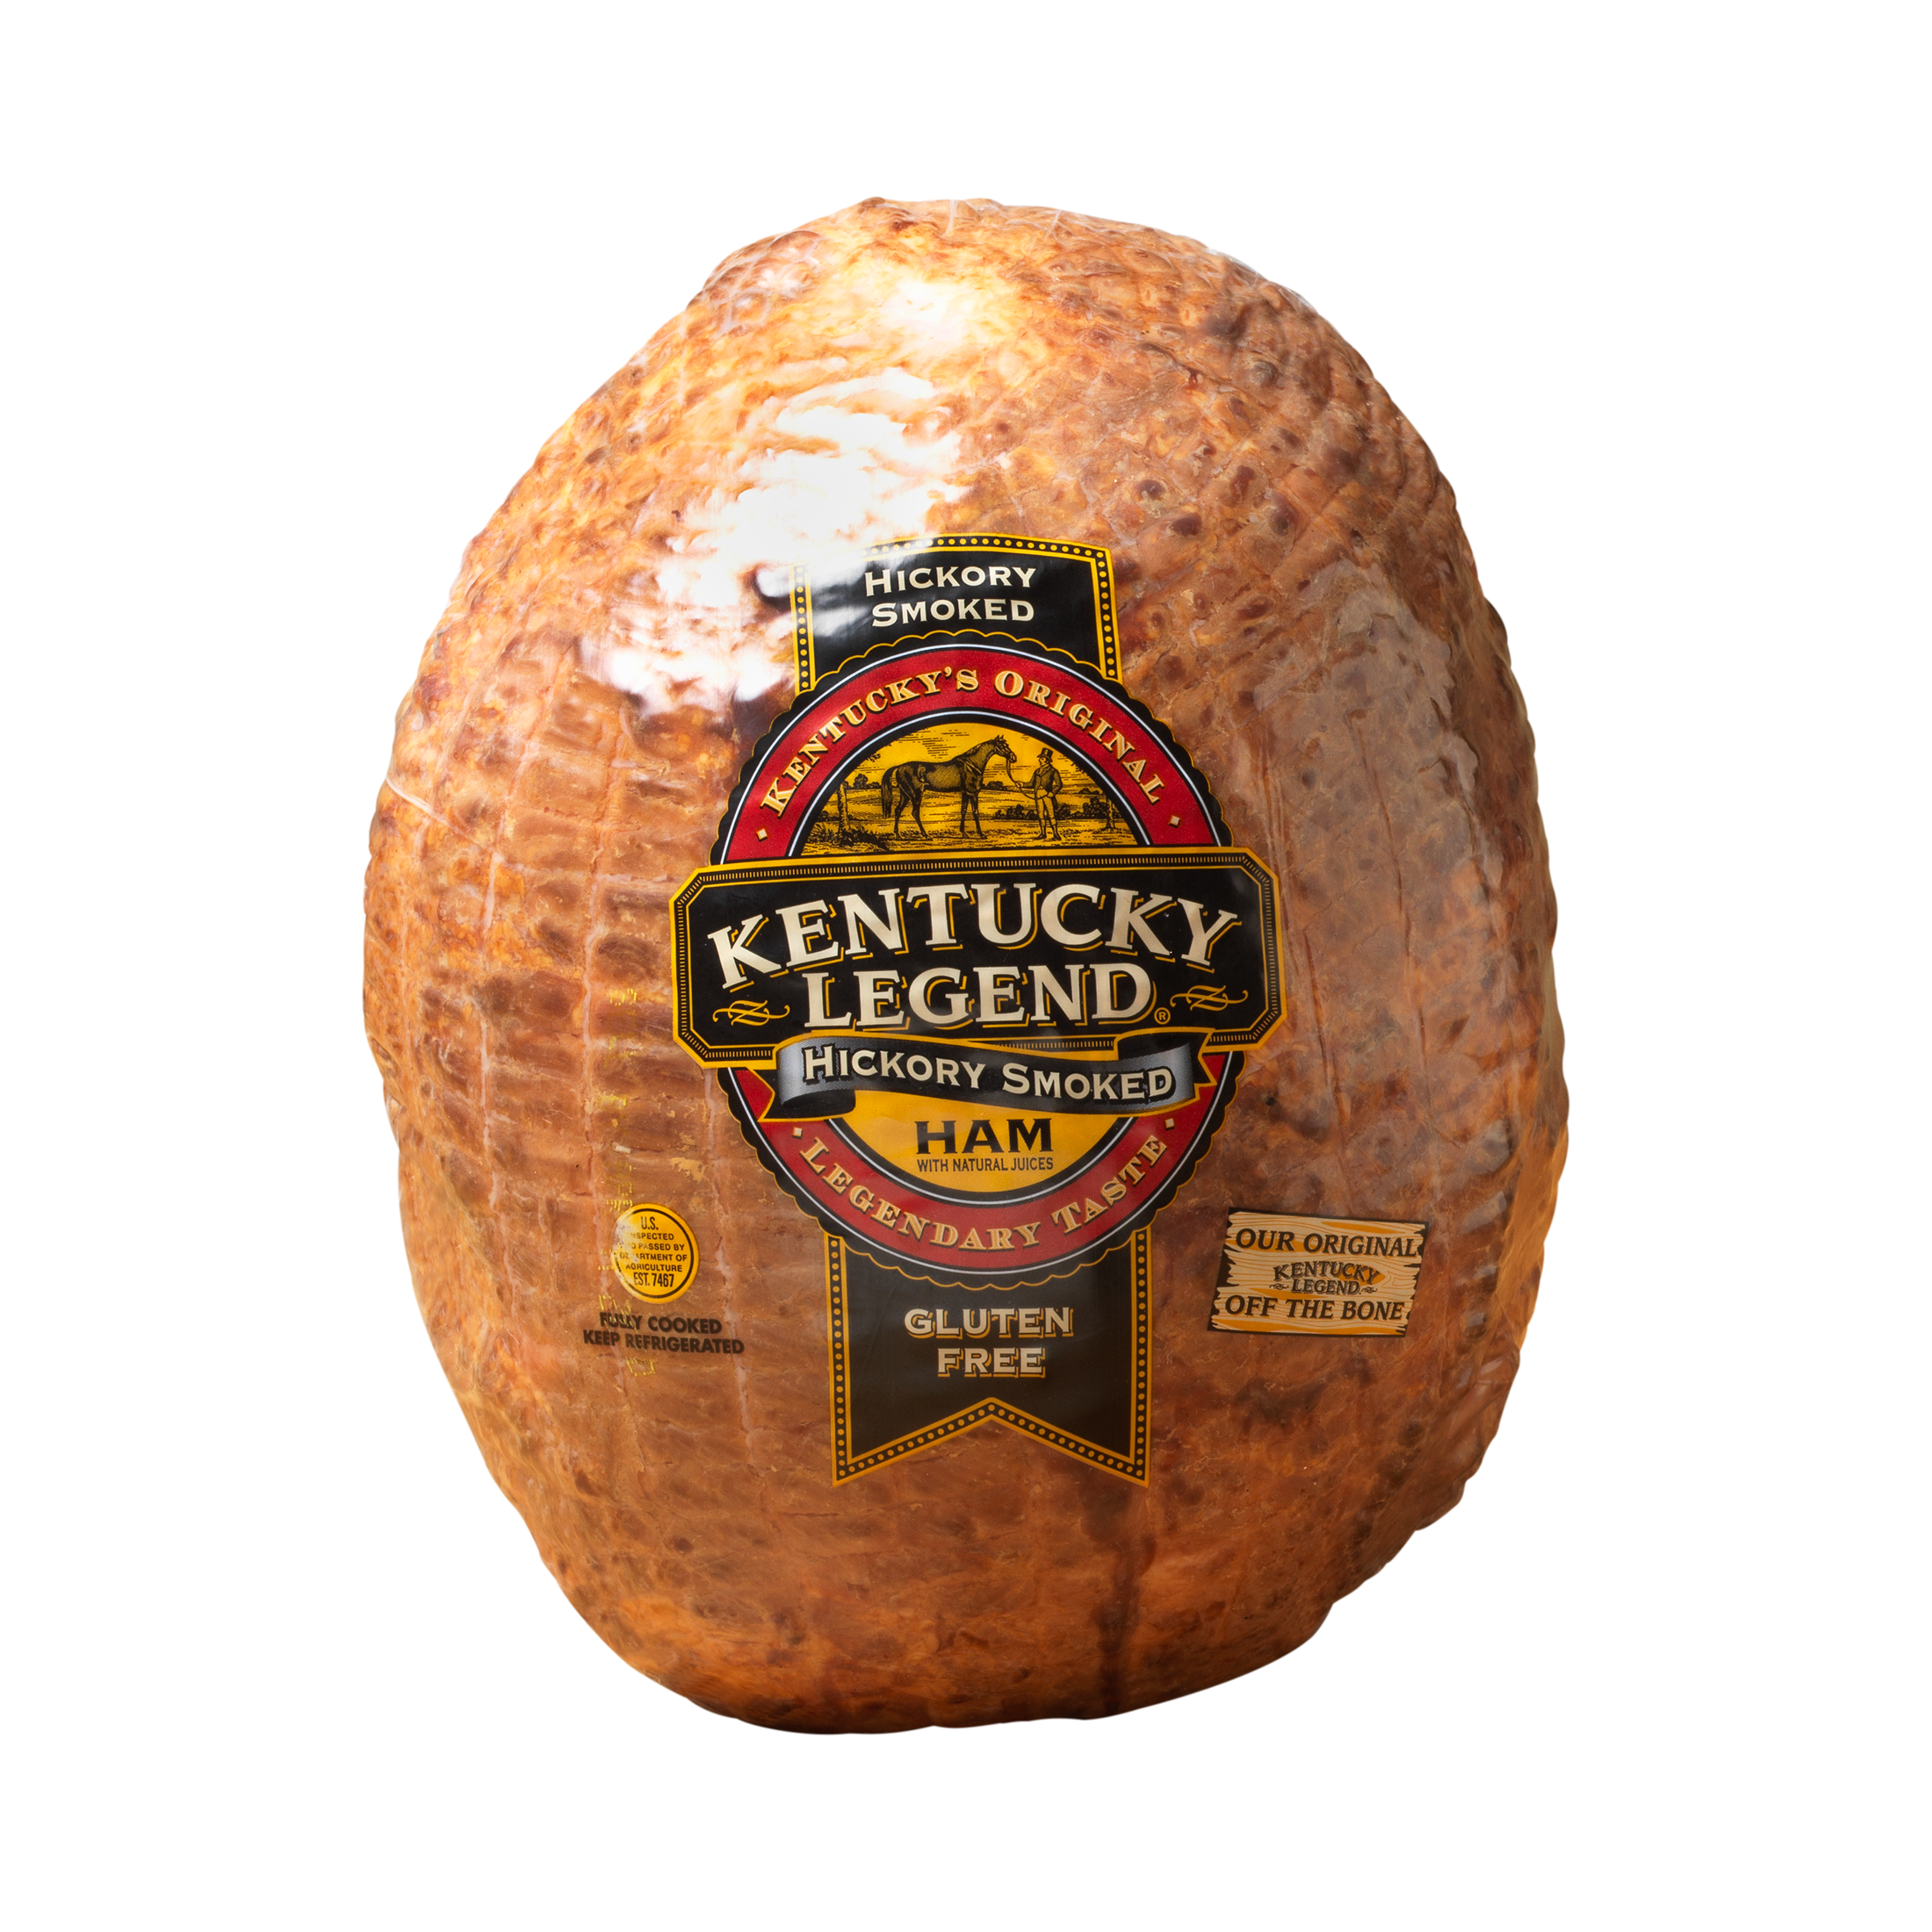 Kentucky Legend Whole Natural Juice Smoked Ham, Gluten-Free, 3 oz Serving Size, Packaged in Plastic - image 1 of 6